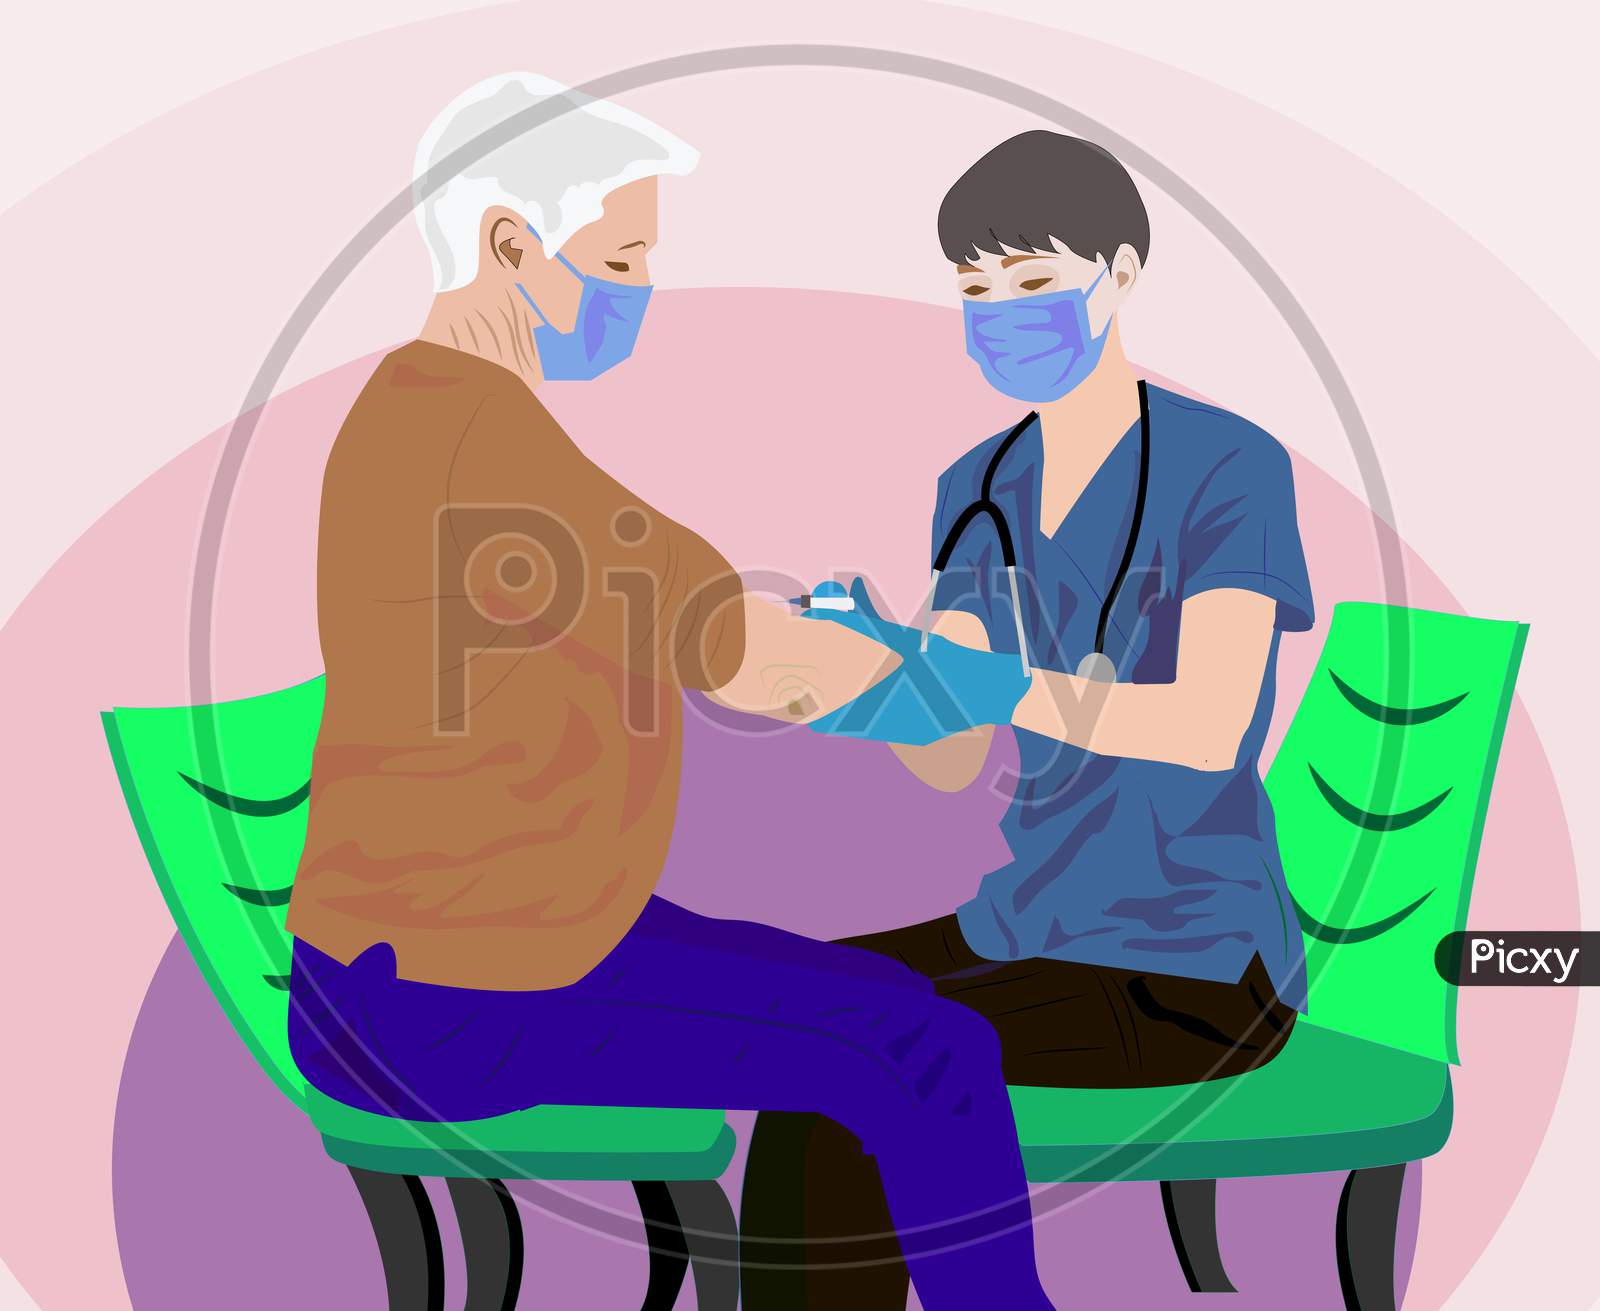 Vaccination of old people, senior woman getting a covid vaccine shot at home. Medical doctor vaccinating an elderly woman, physician or nurse giving injection against coronavirus